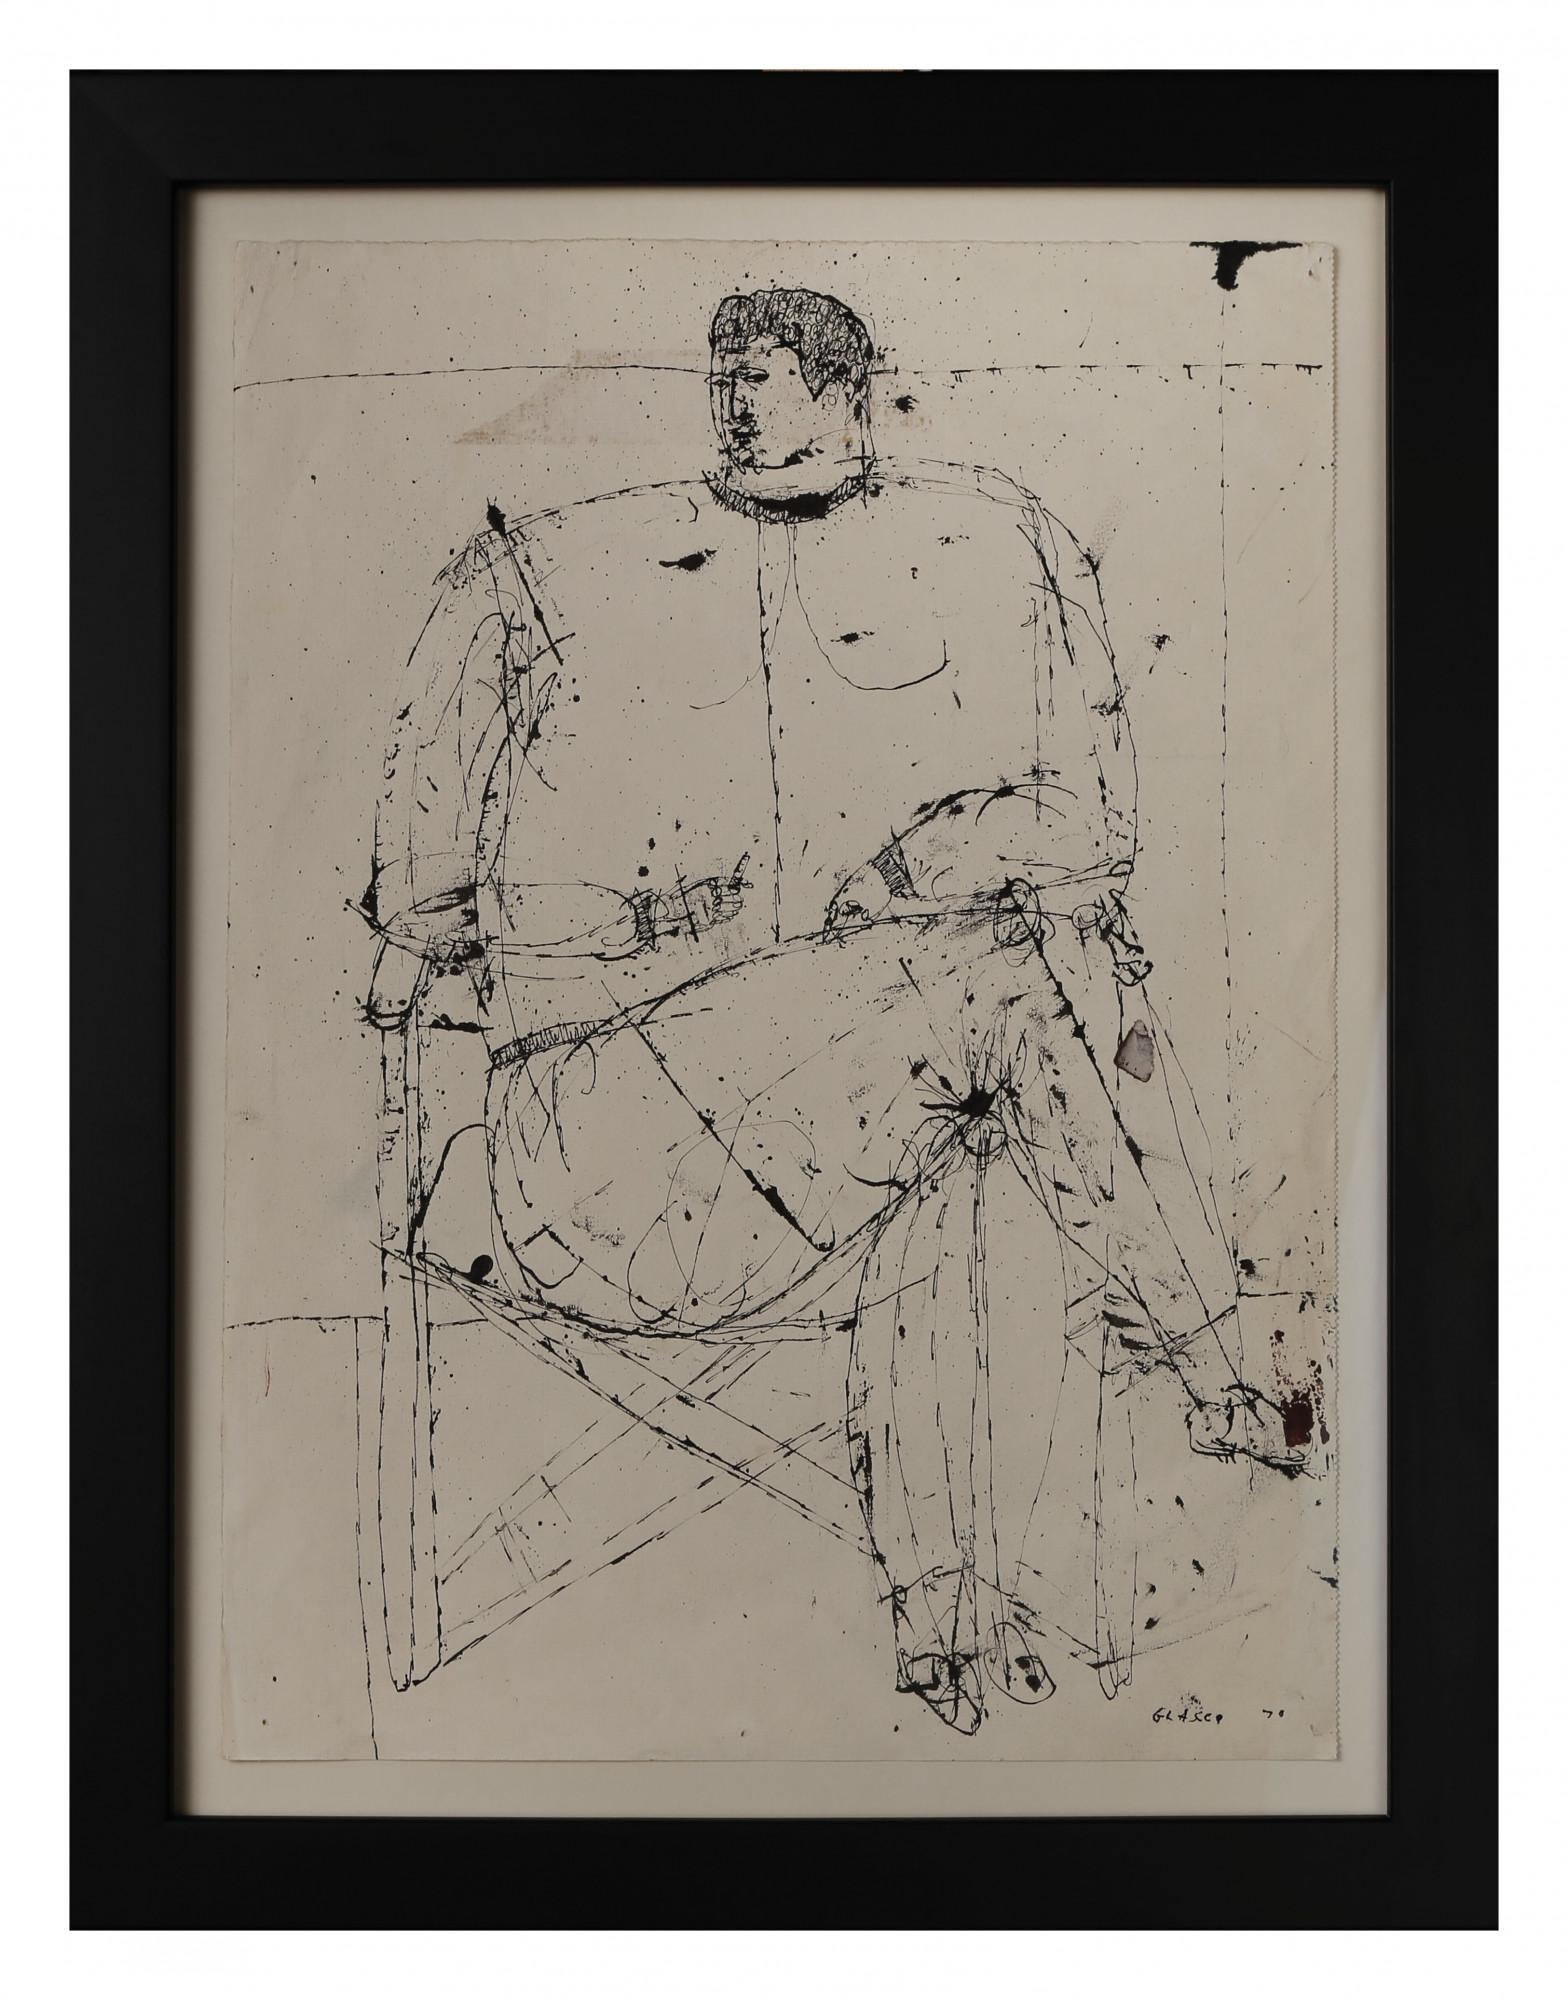 Seated Figure, 20th century figural abstract expressionist ink drawing - Art by Joseph Glasco